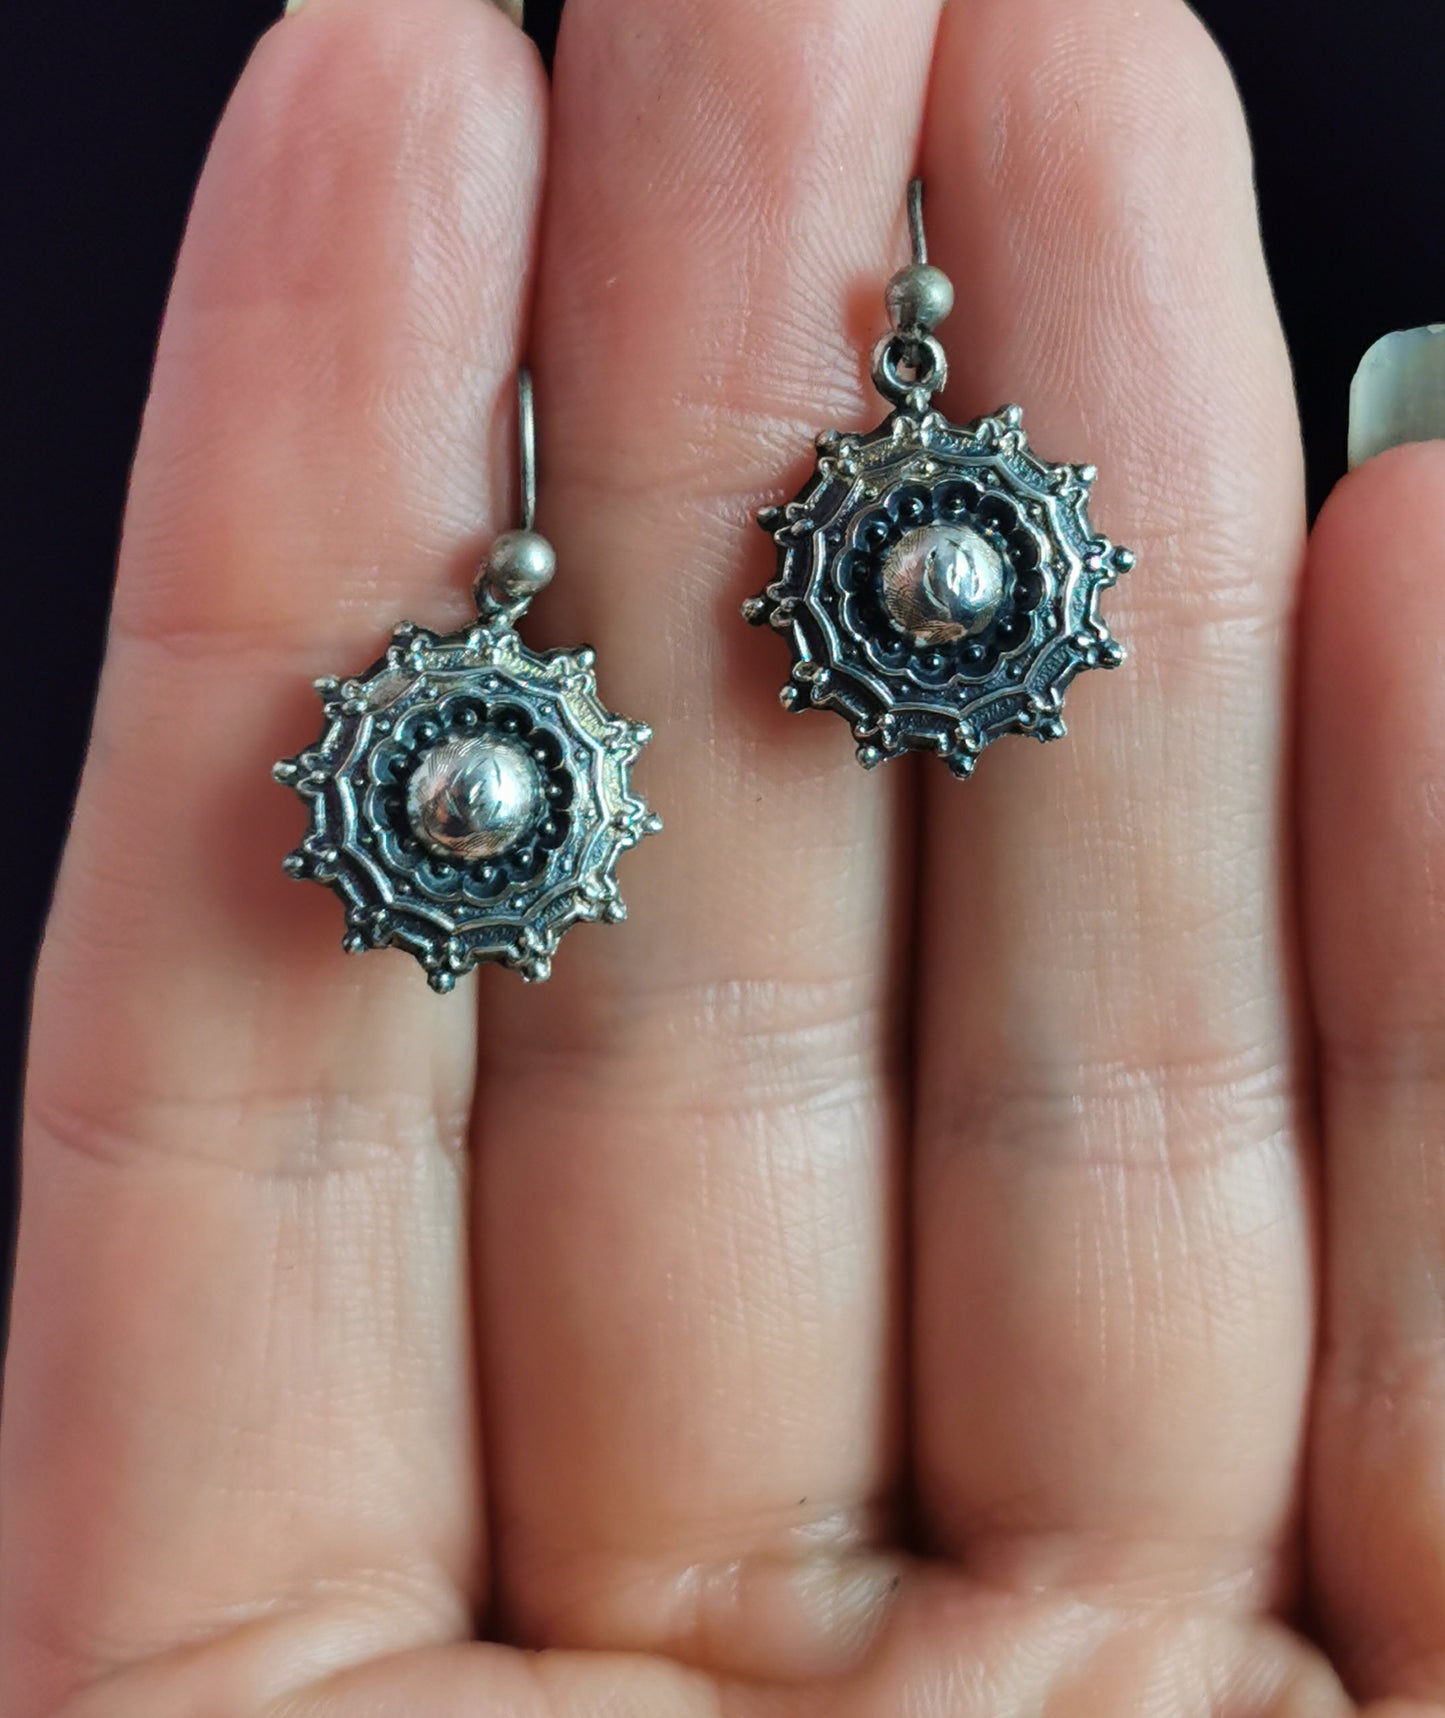 Antique Victorian silver target earrings